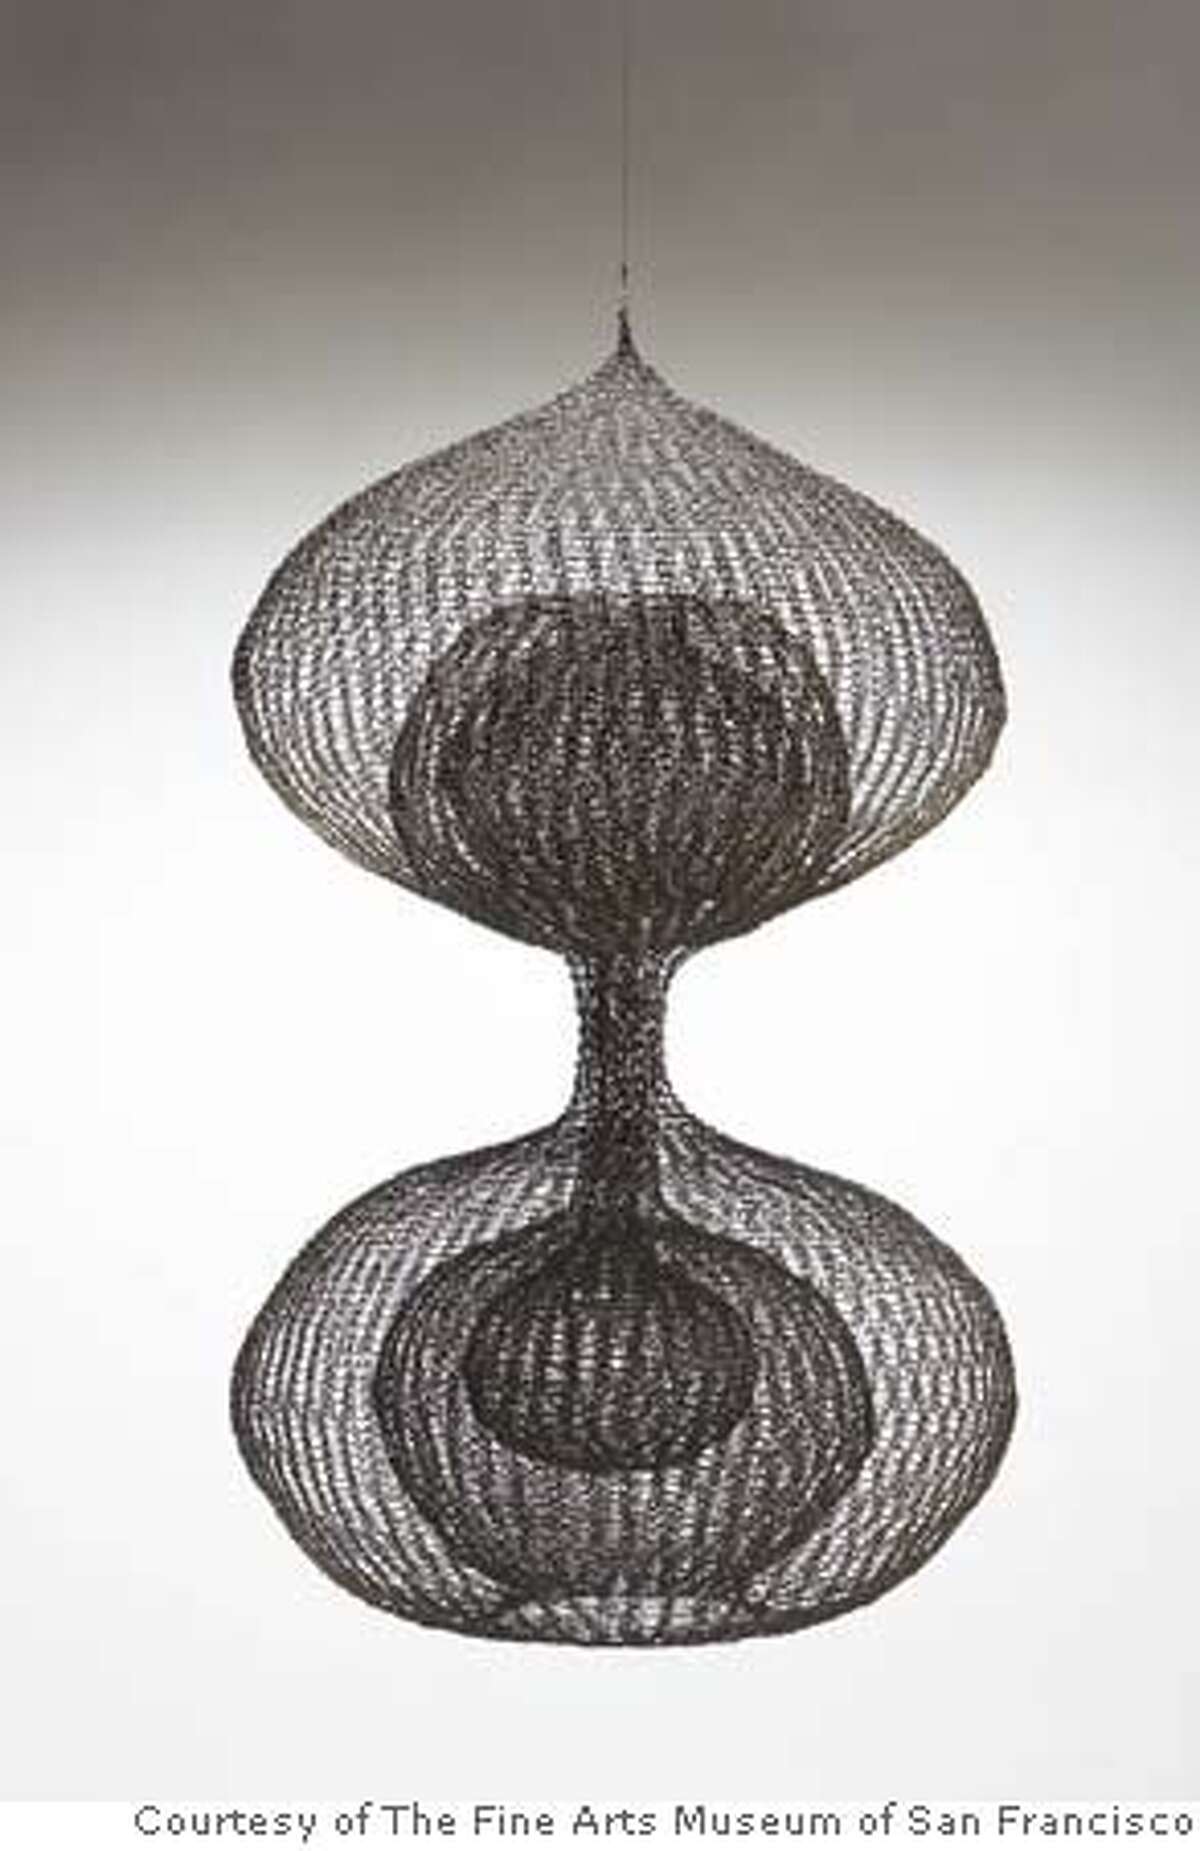 Untitled (S.378) early 1960's.Iron wire sculpture by Ruth Asawa. courtesy of The Fine Arts Museum of San Francisco